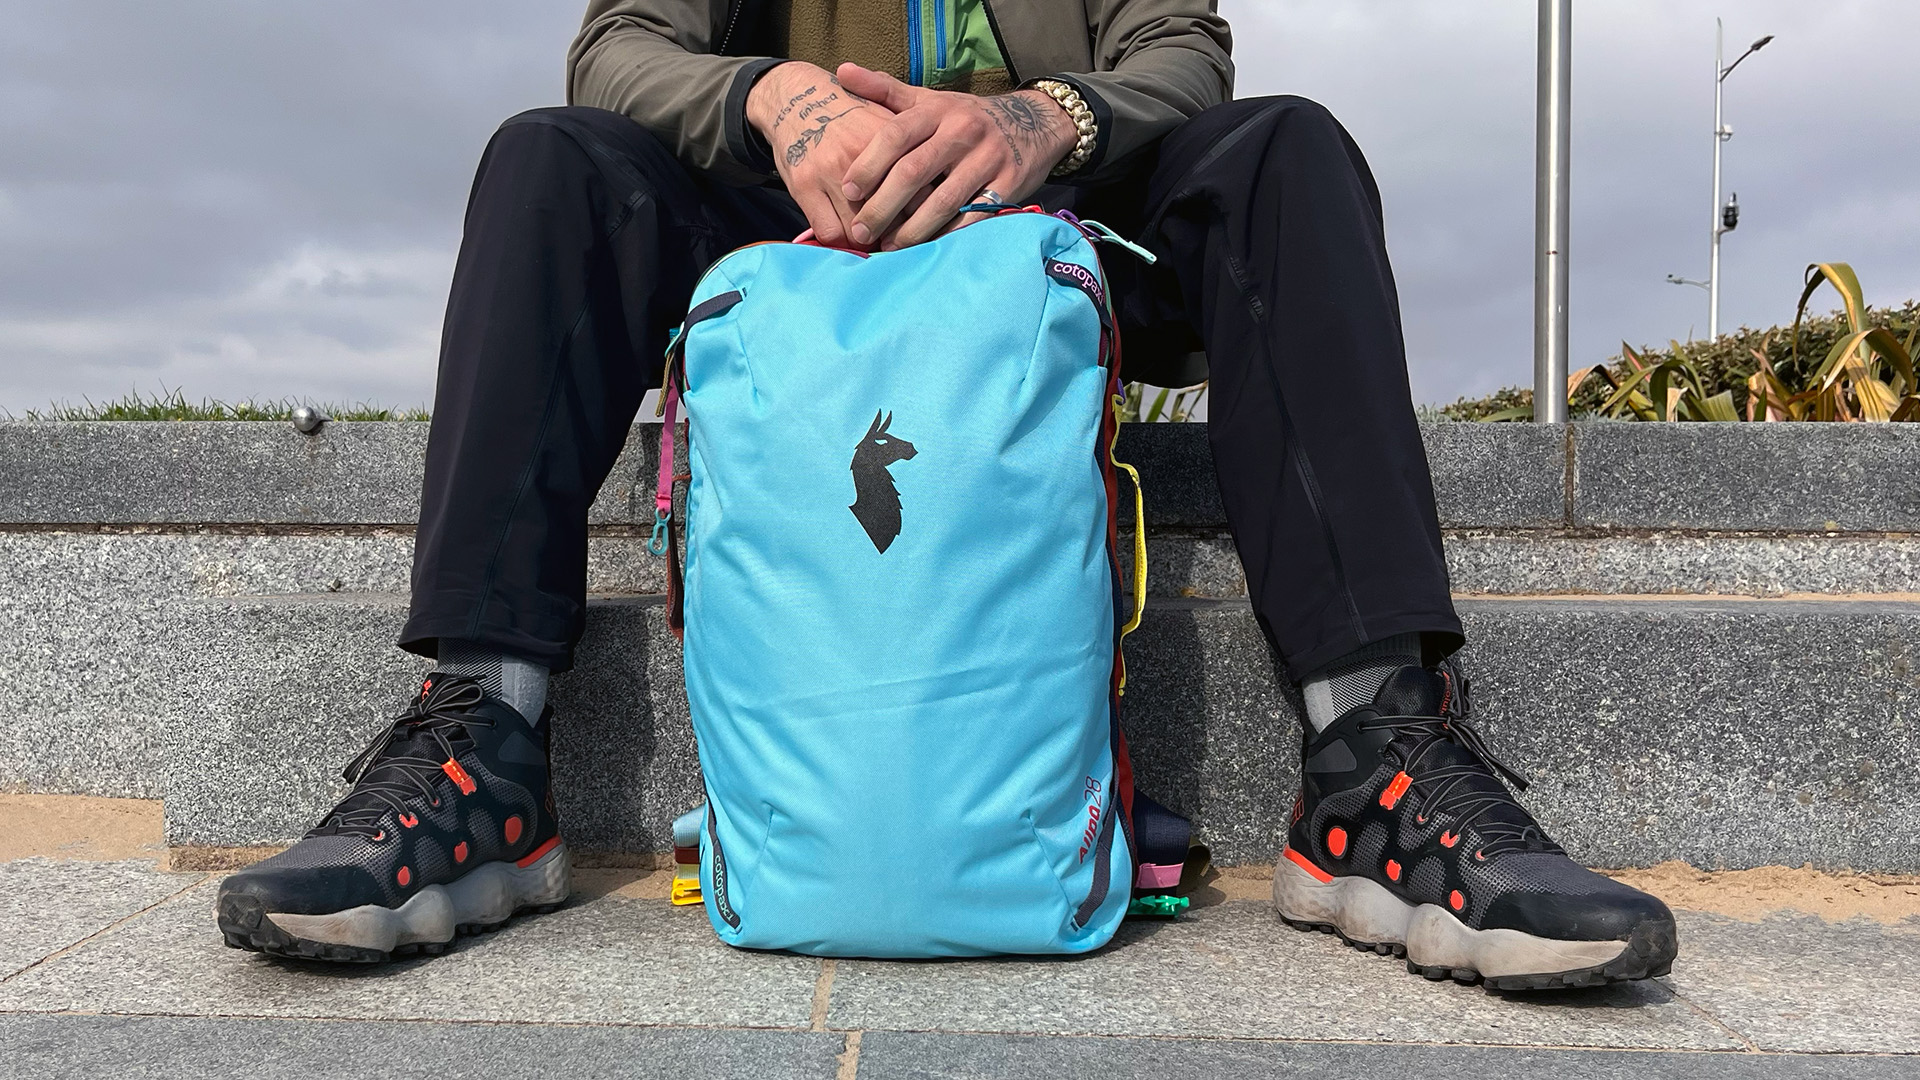 Cotopaxi Allpa Travel Pack review: The perfect bag for…